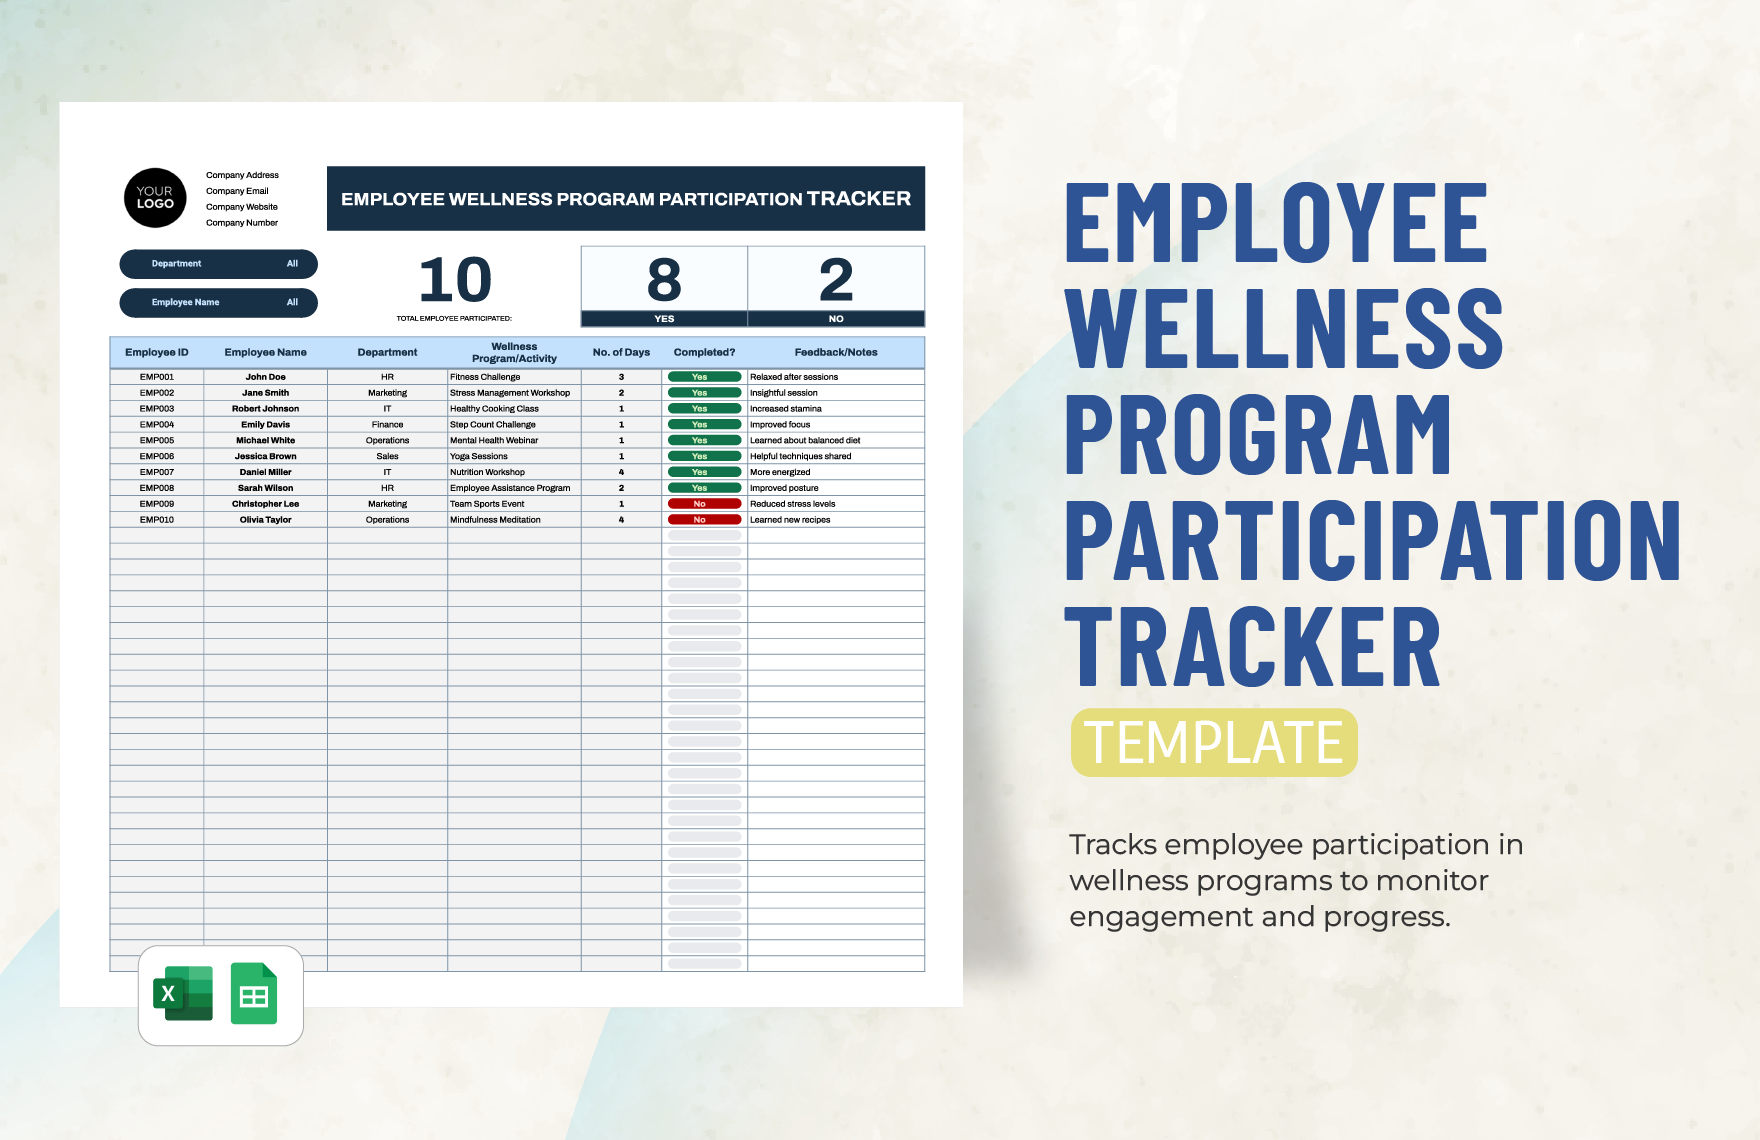 Employee Wellness Program Participation Tracker Template in Excel, Google Sheets